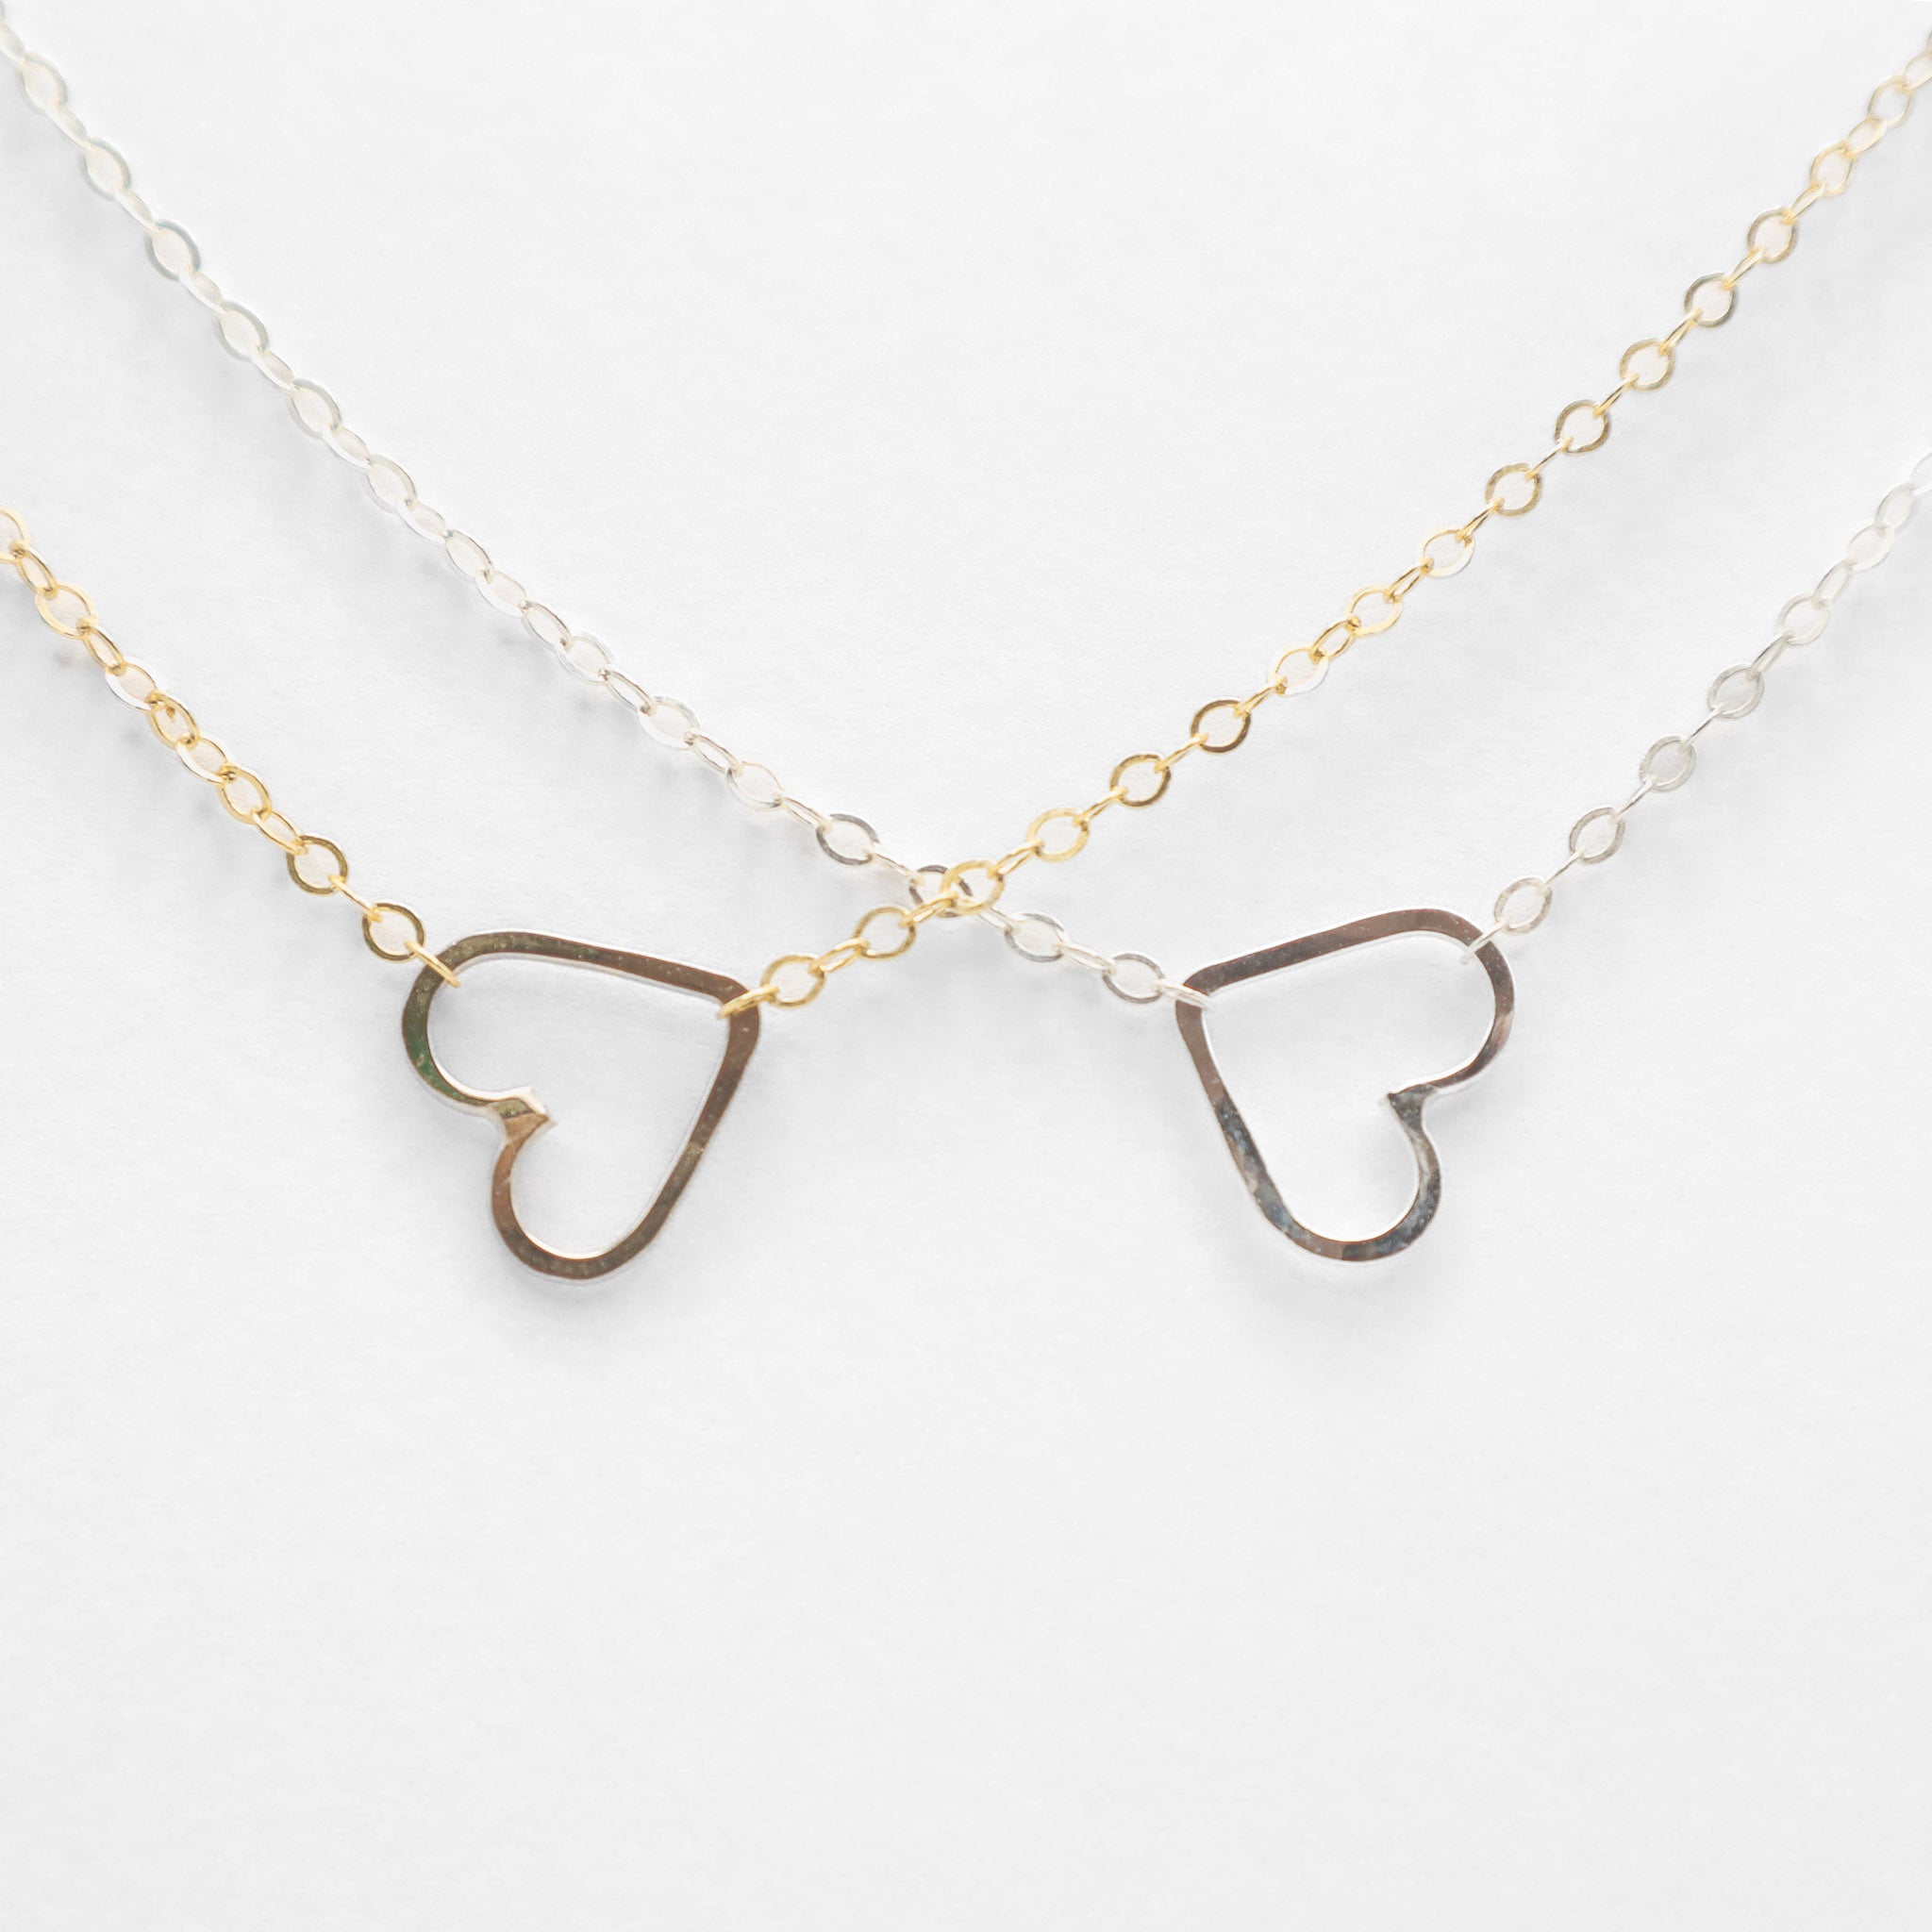 Gold and Silver Sweetheart Necklaces, closeup image